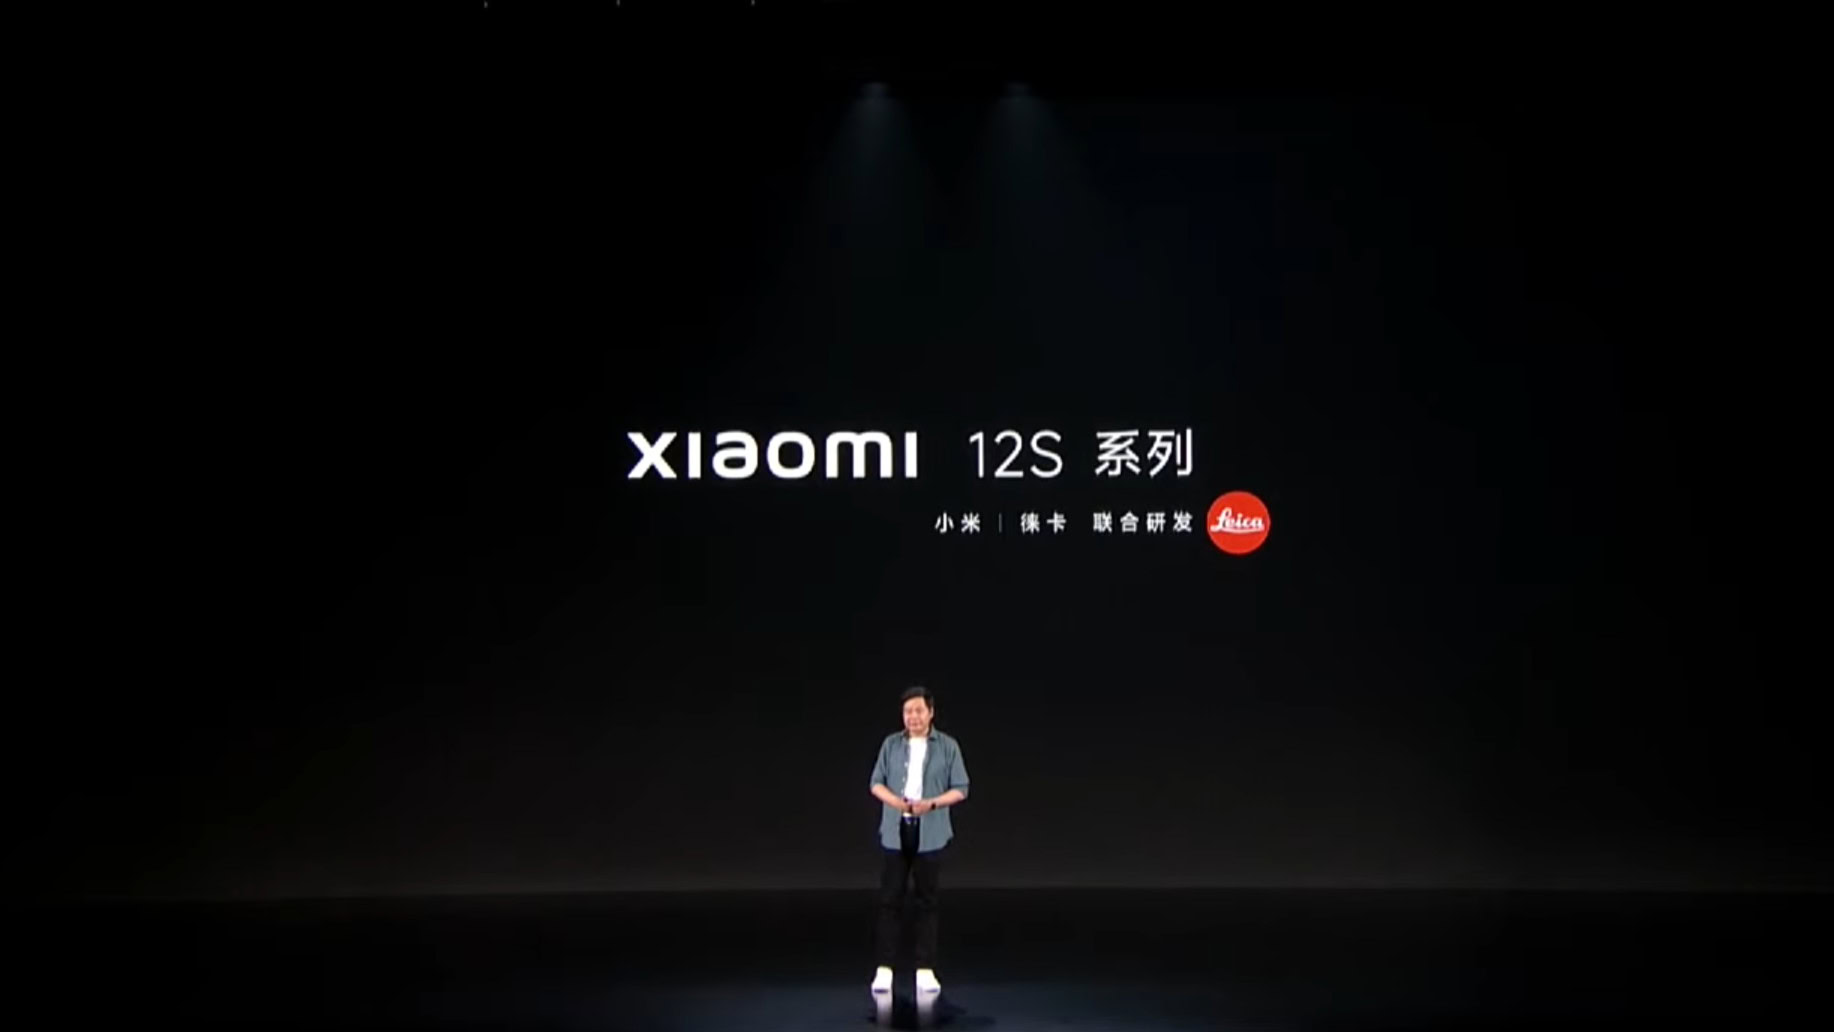 Xiaomi 12S series is only for China, but we wish it wasn't - 9to5Google